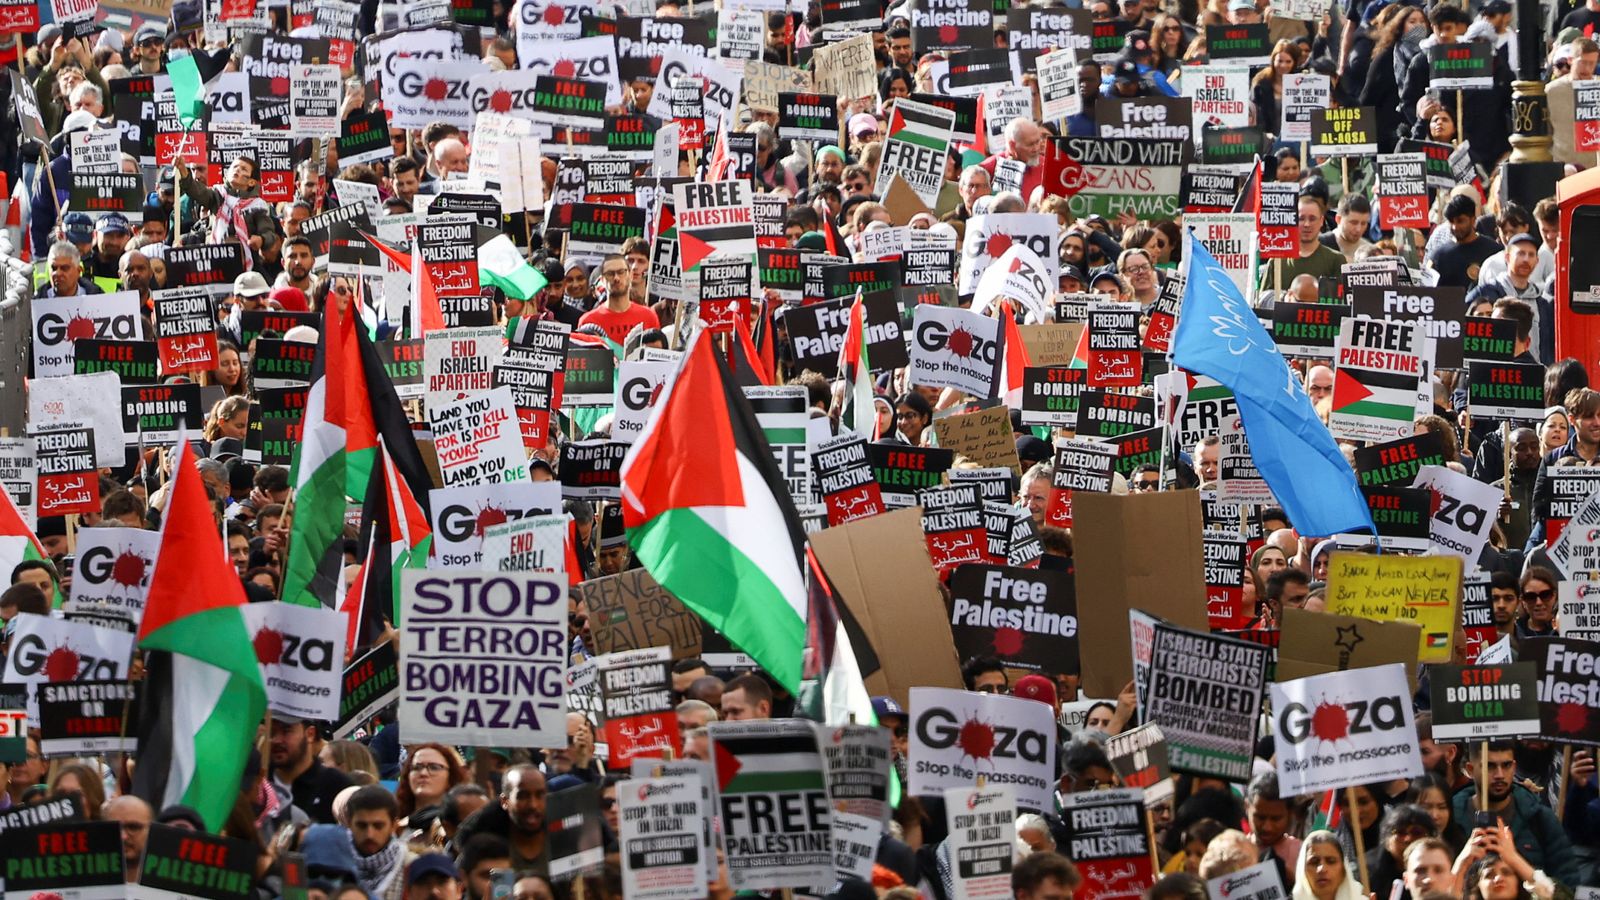 Israel-Hamas war: Around 100,000 people descend on central London for pro-Palestine march | UK News | Sky News